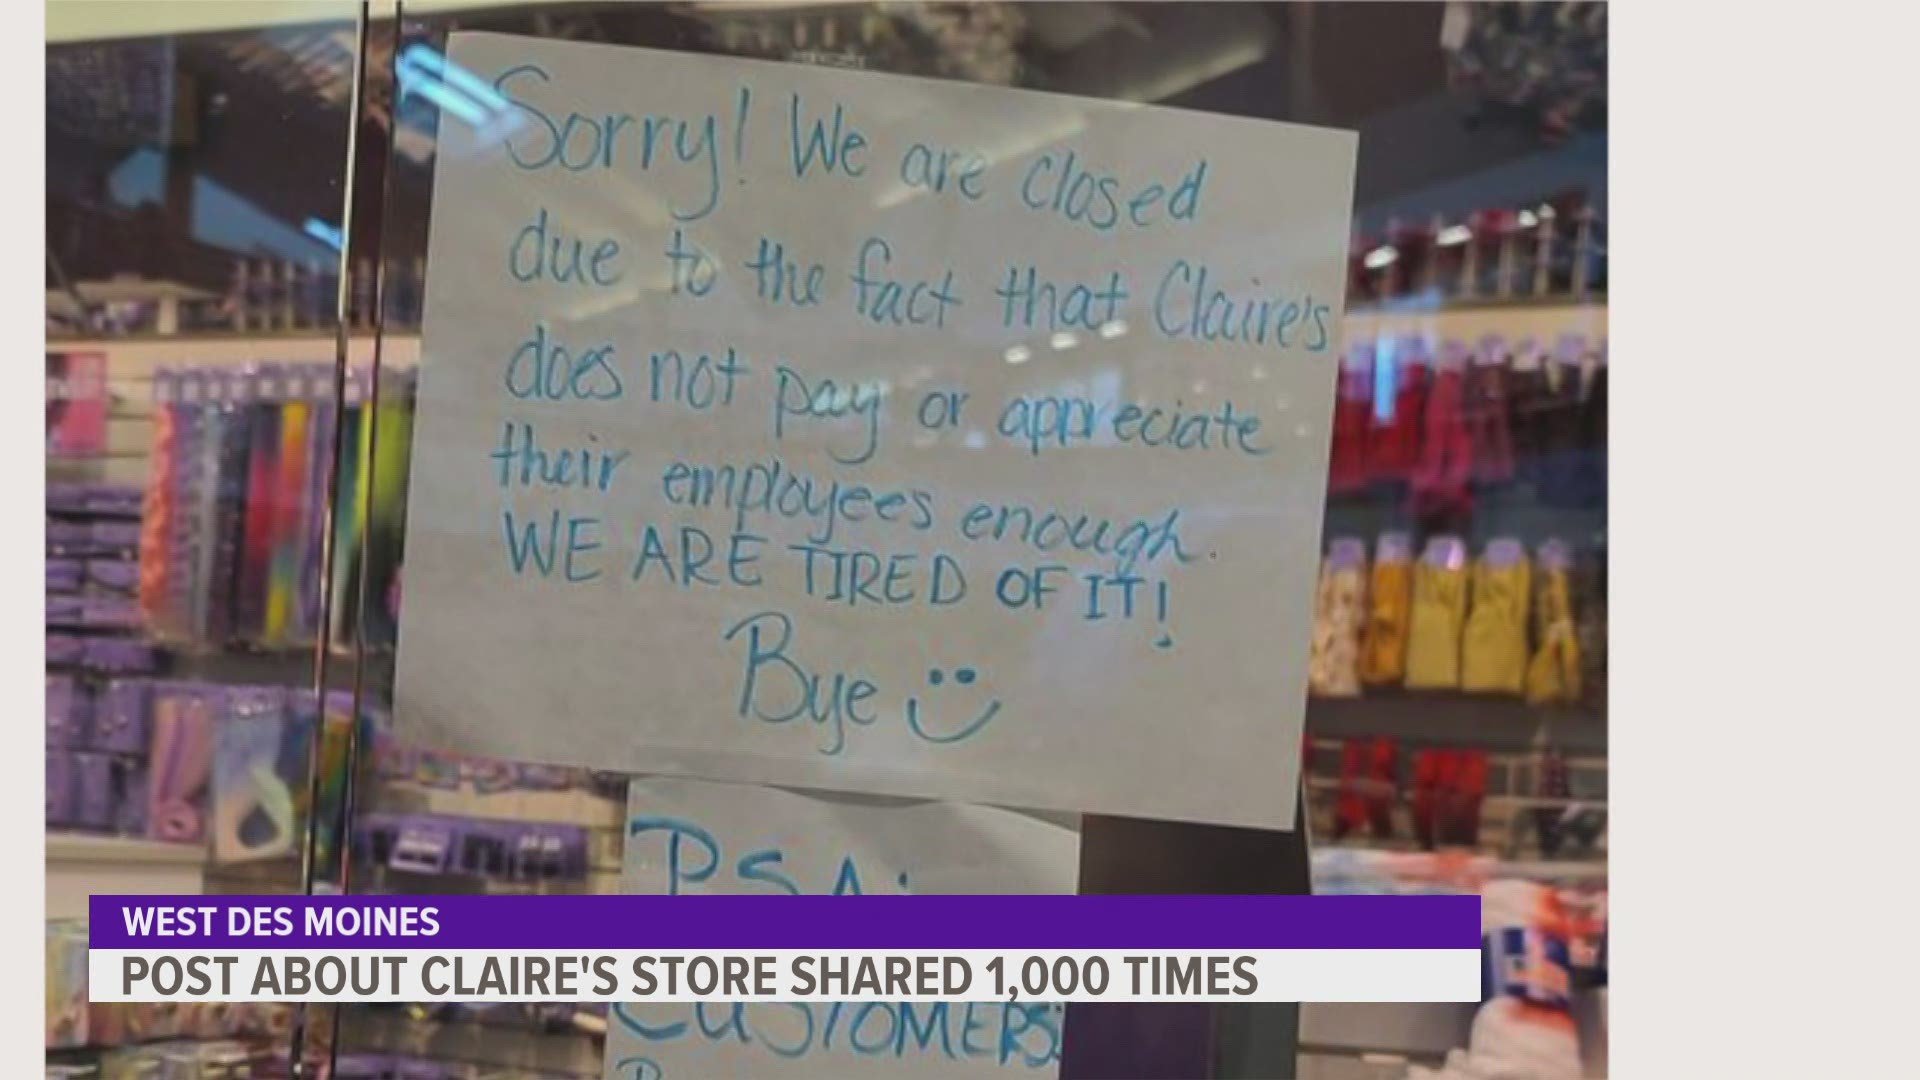 "We are closed due to the fact that Claire's does not pay or appreciate their employees enough," one of the signs reads. "We are tired of it! "